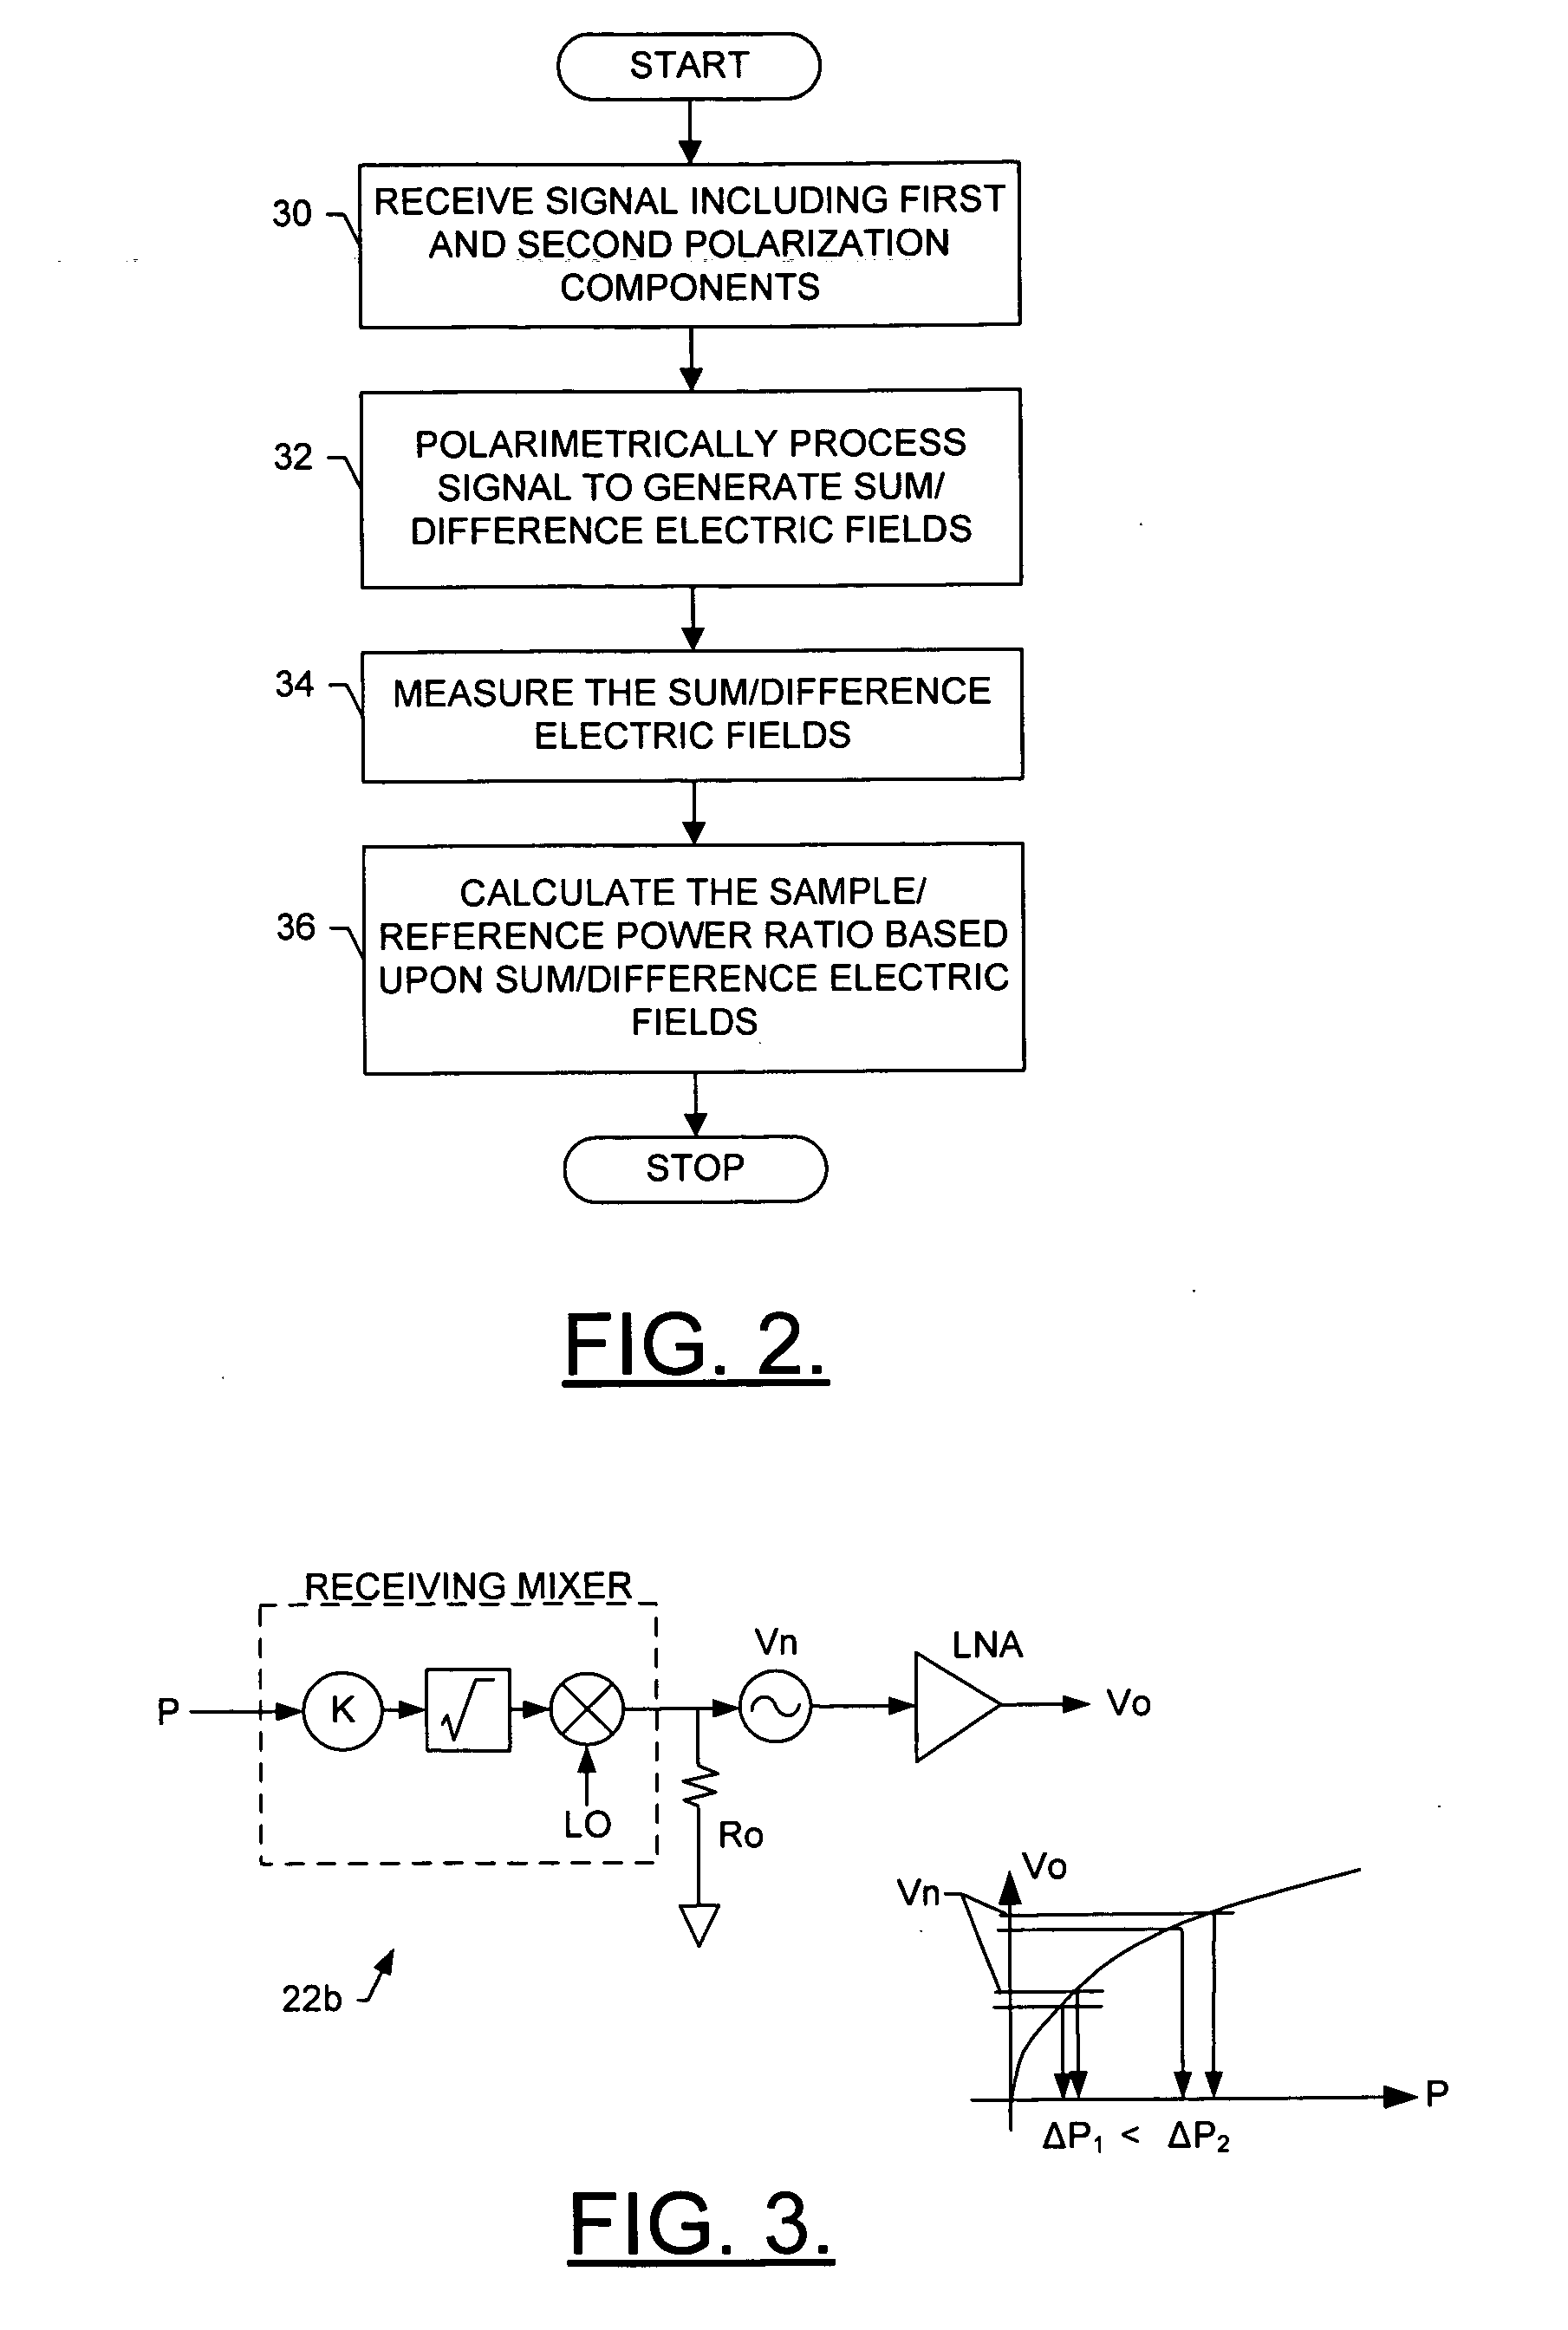 System and method for power ratio determination with common mode suppression through electric field differencing